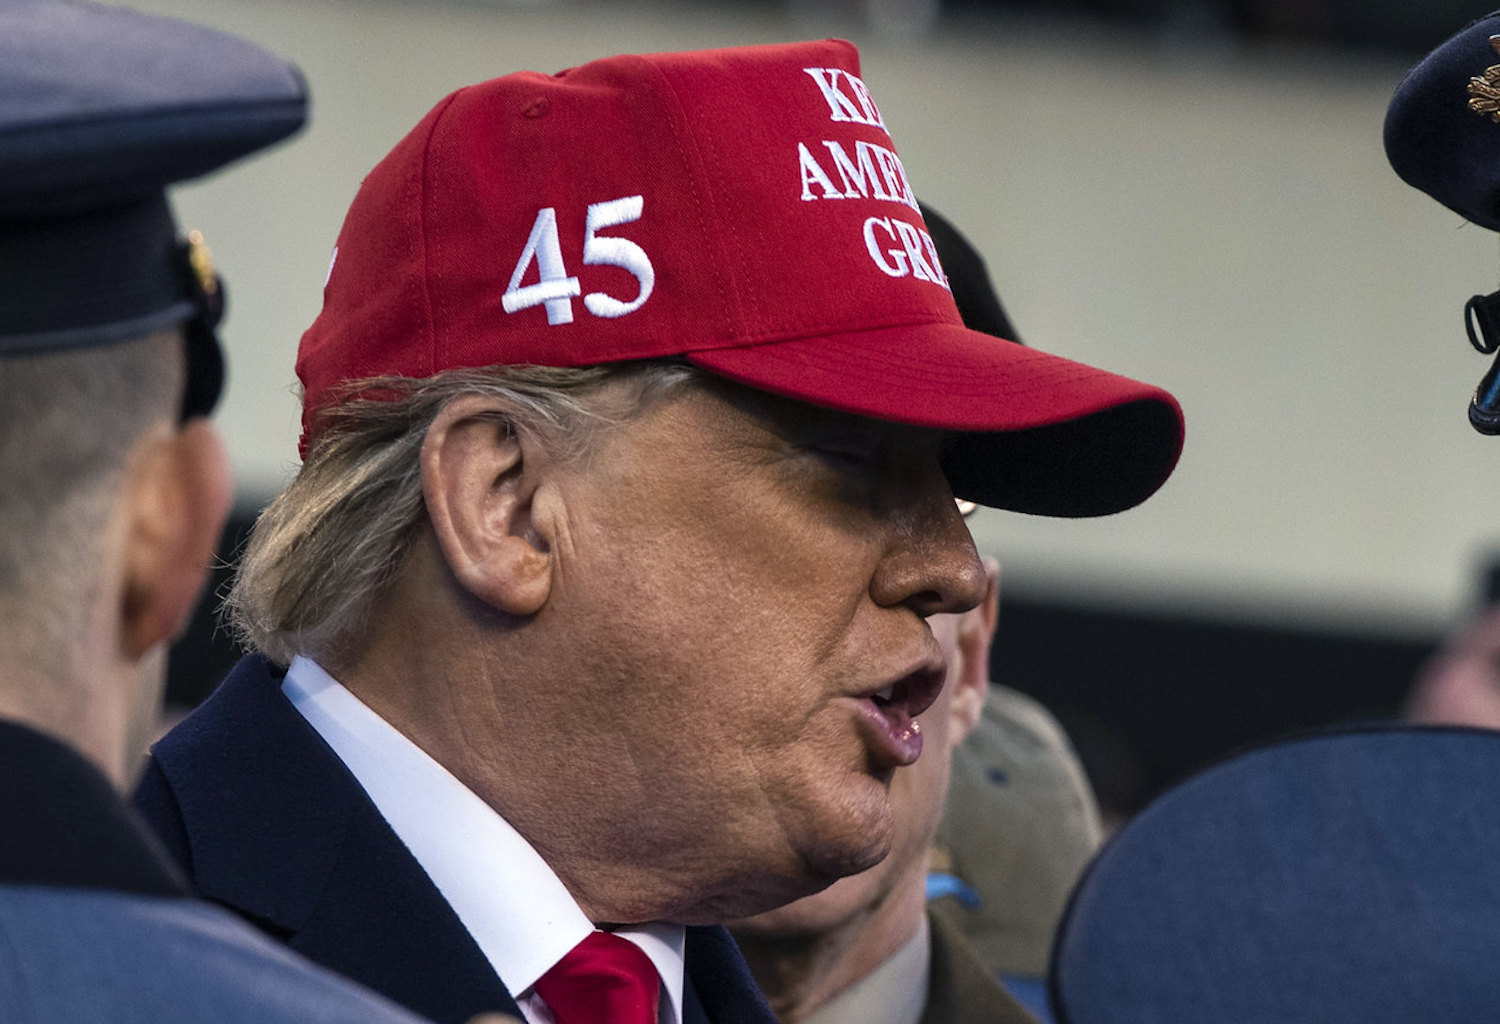 Donald Trump wearing a red baseball cap with the number 45 in white on the side.